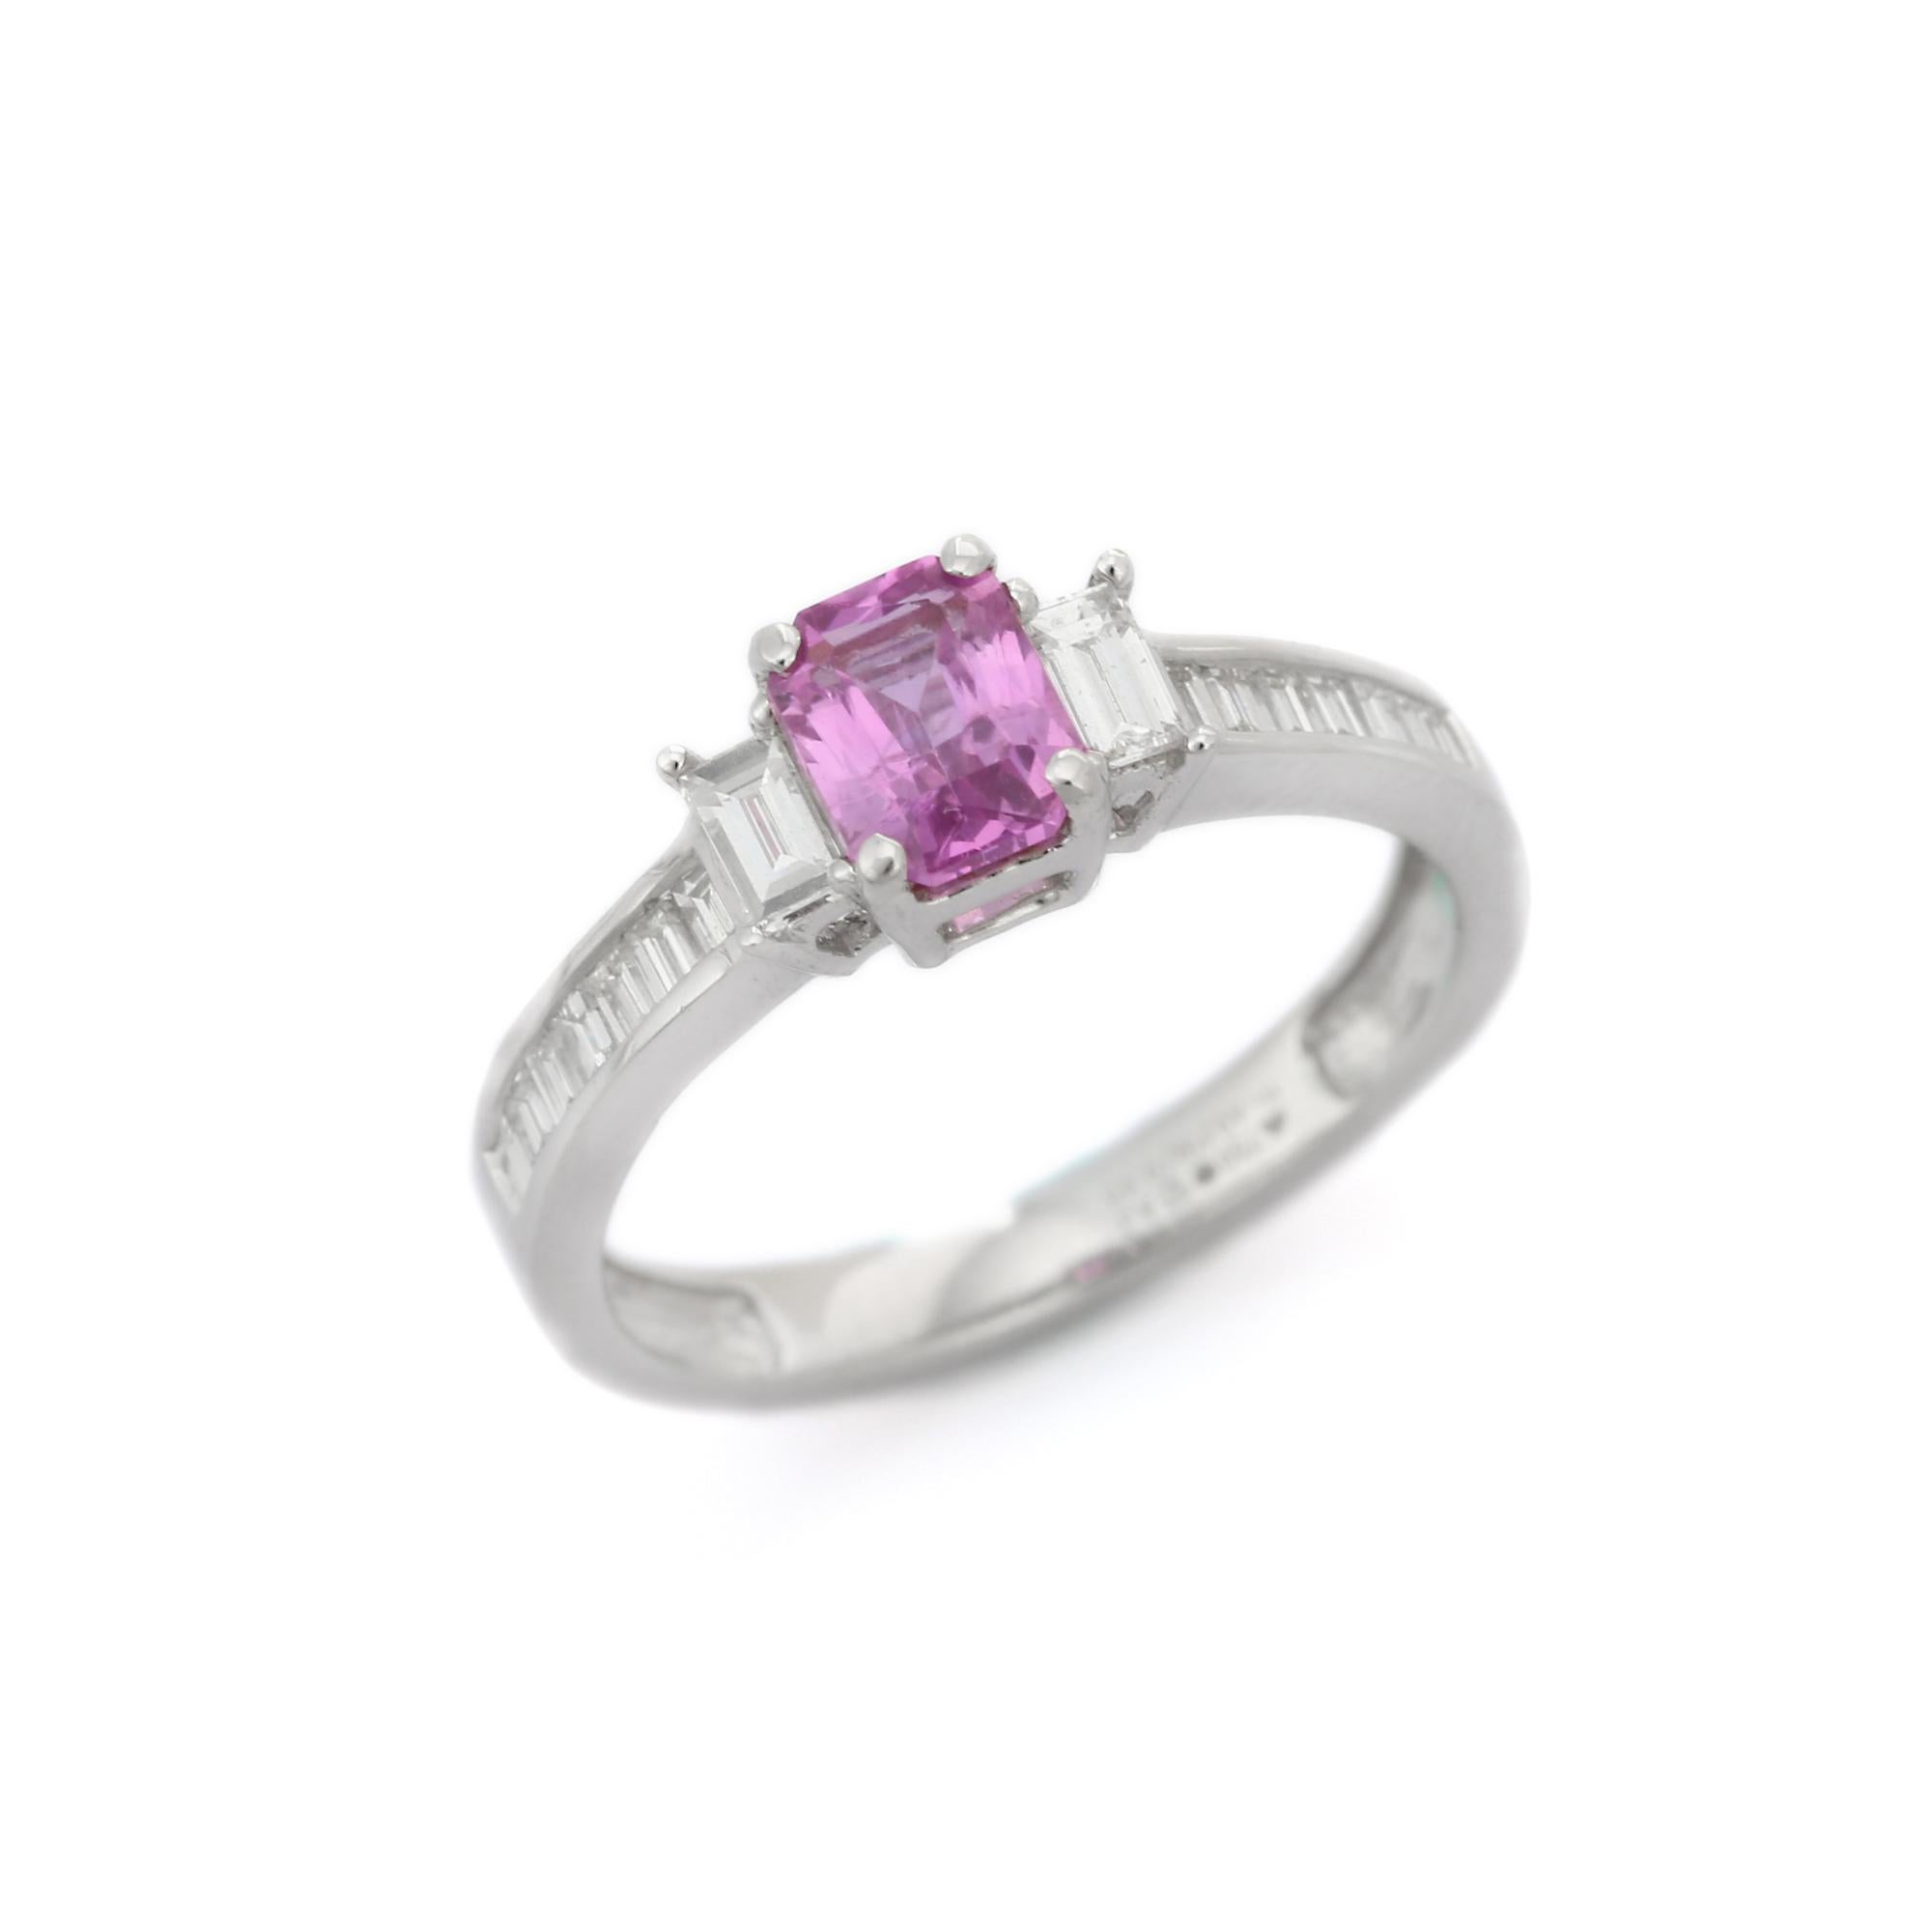 For Sale:  1.45 Carat Certified Pink Sapphire and Diamond Engagement Ring in 18K White Gold 3